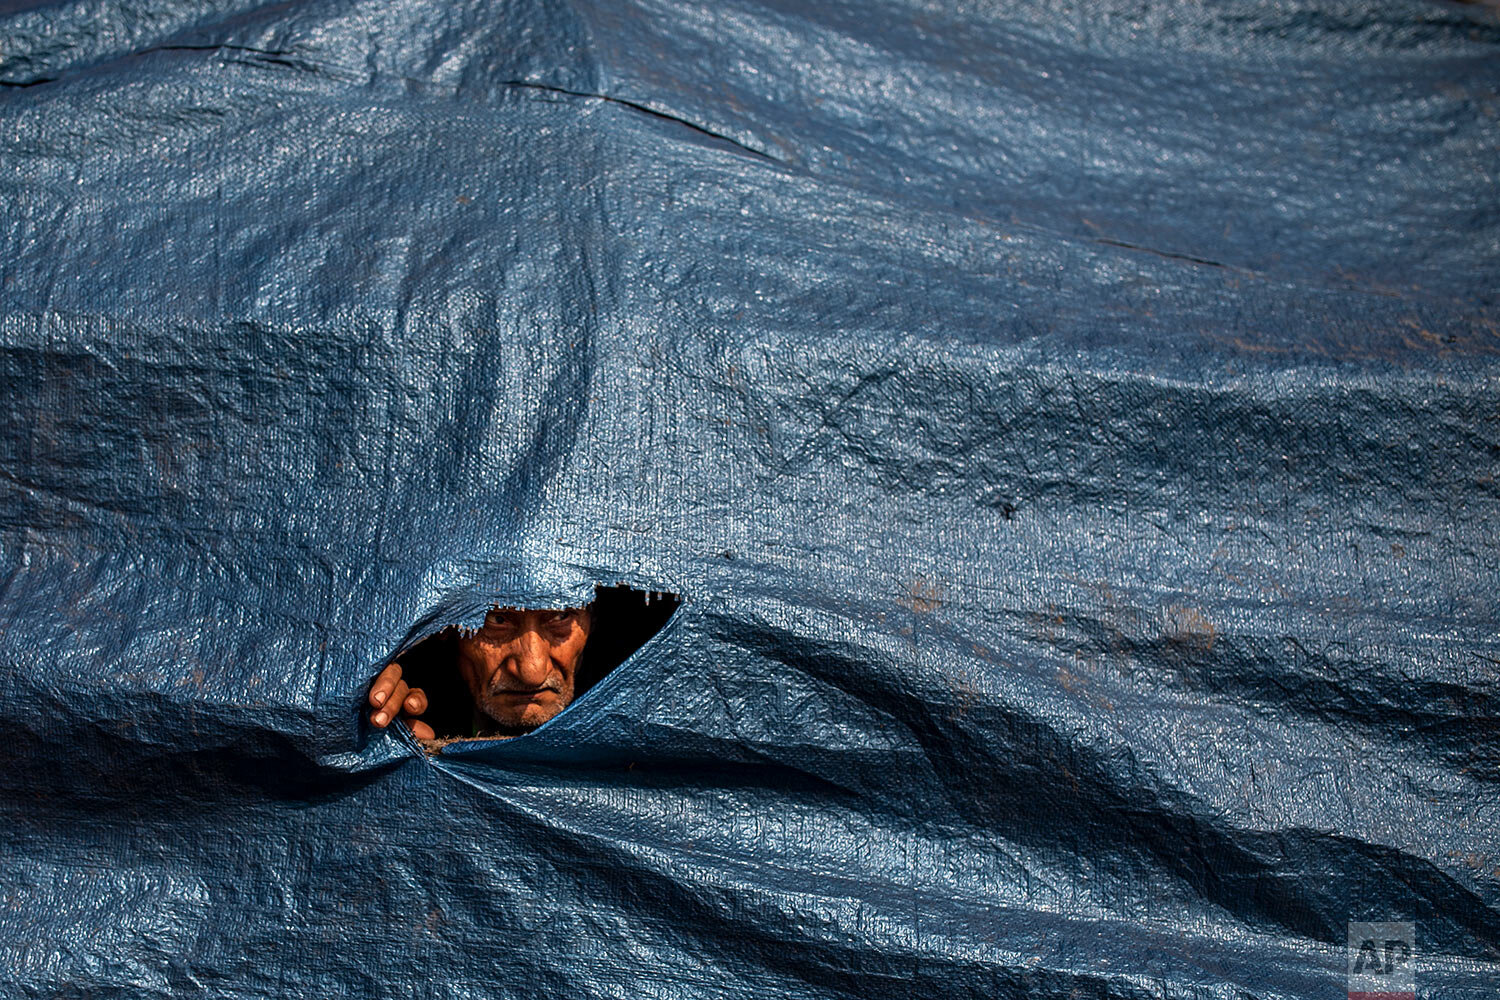  An elderly protesting farmer looks through a hole in a tarpaulin covering the tractor trolley as they march to the capital during India's Republic Day celebrations in New Delhi, India, Tuesday, Jan. 26, 2021.  (AP Photo/Altaf Qadri) 